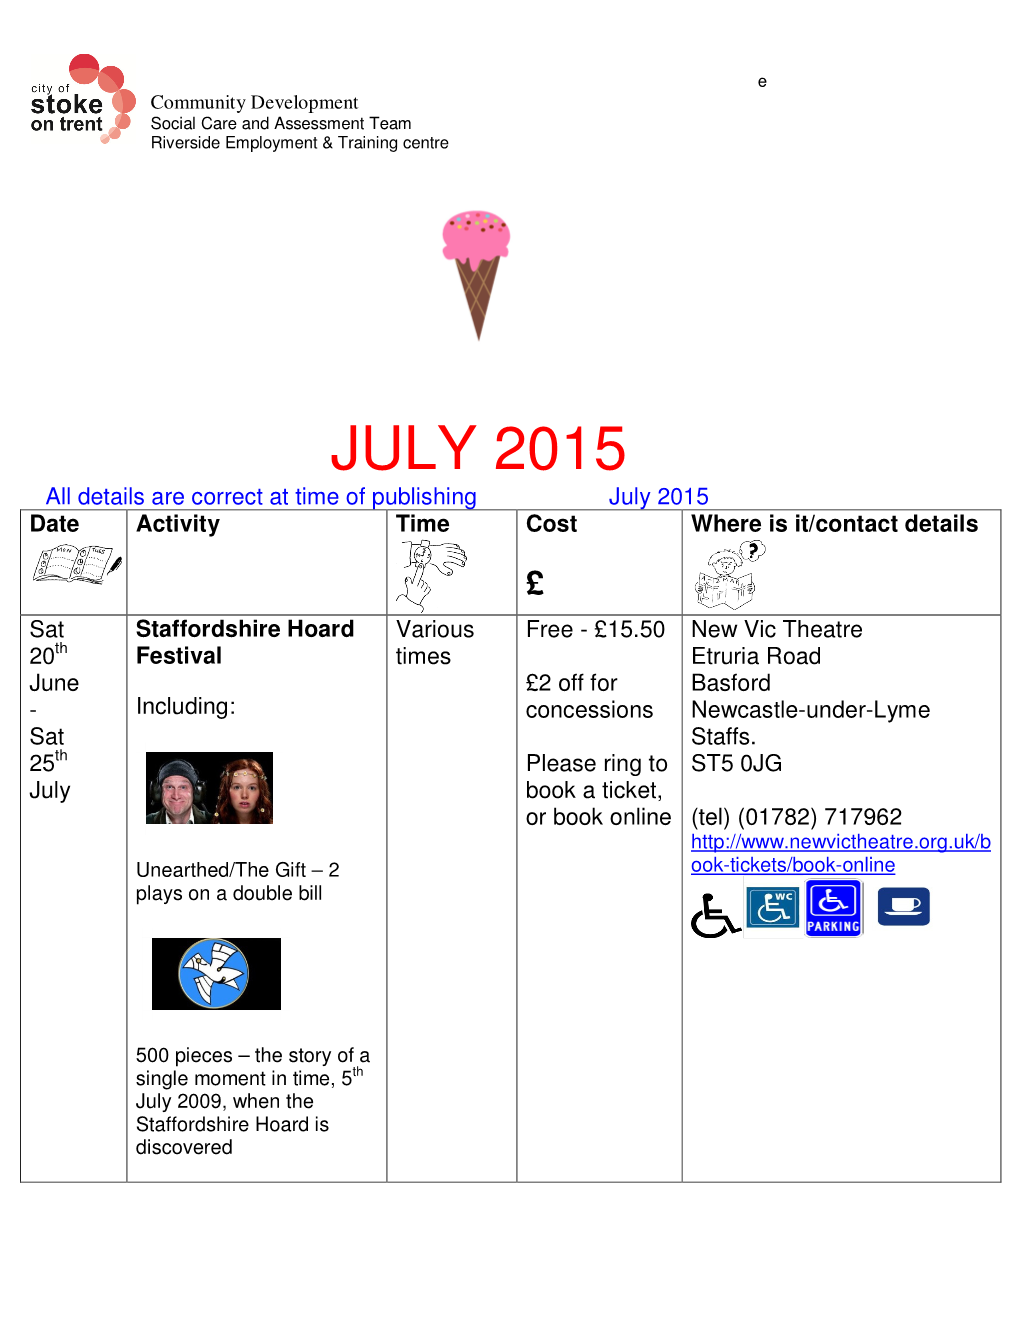 JULY 2015 All Details Are Correct at Time of Publishing July 2015 Date Activity Time Cost Where Is It/Contact Details